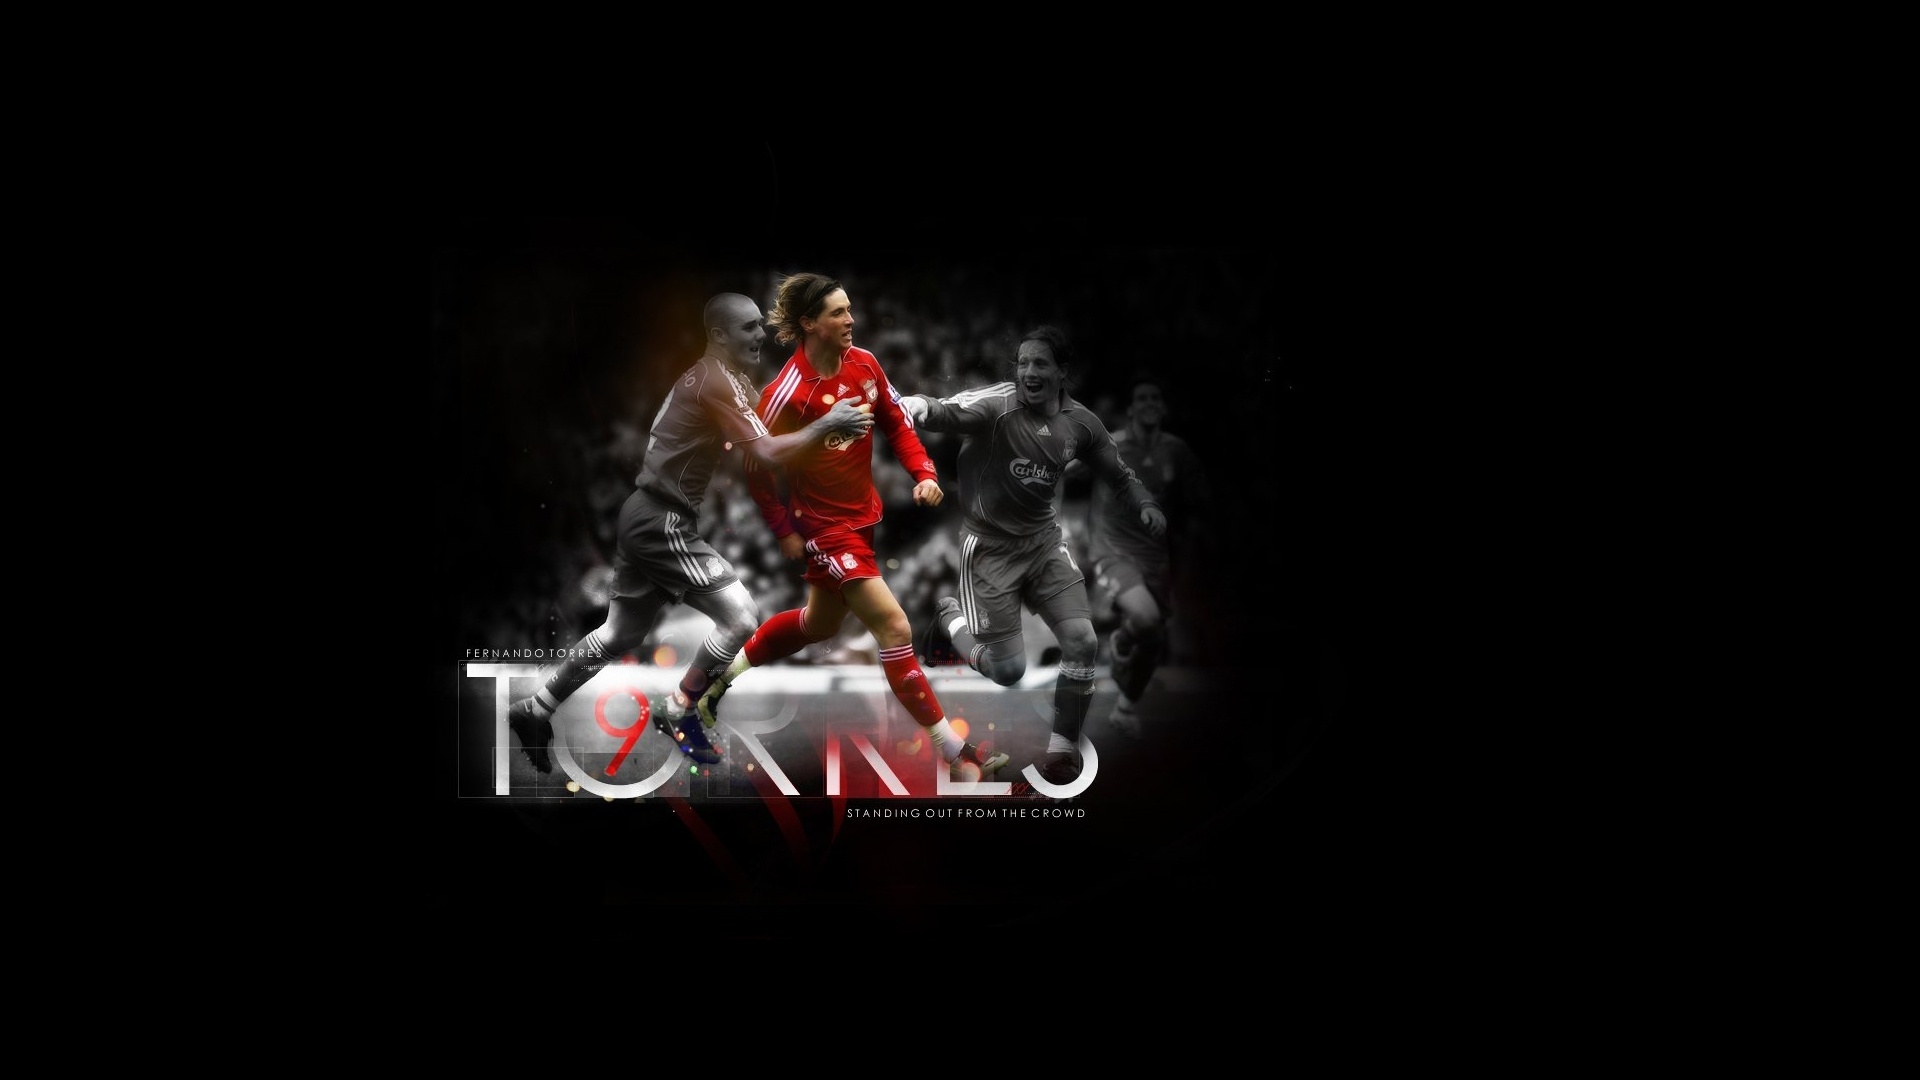 Fernando Torres playing for 1920 x 1080 HDTV 1080p resolution